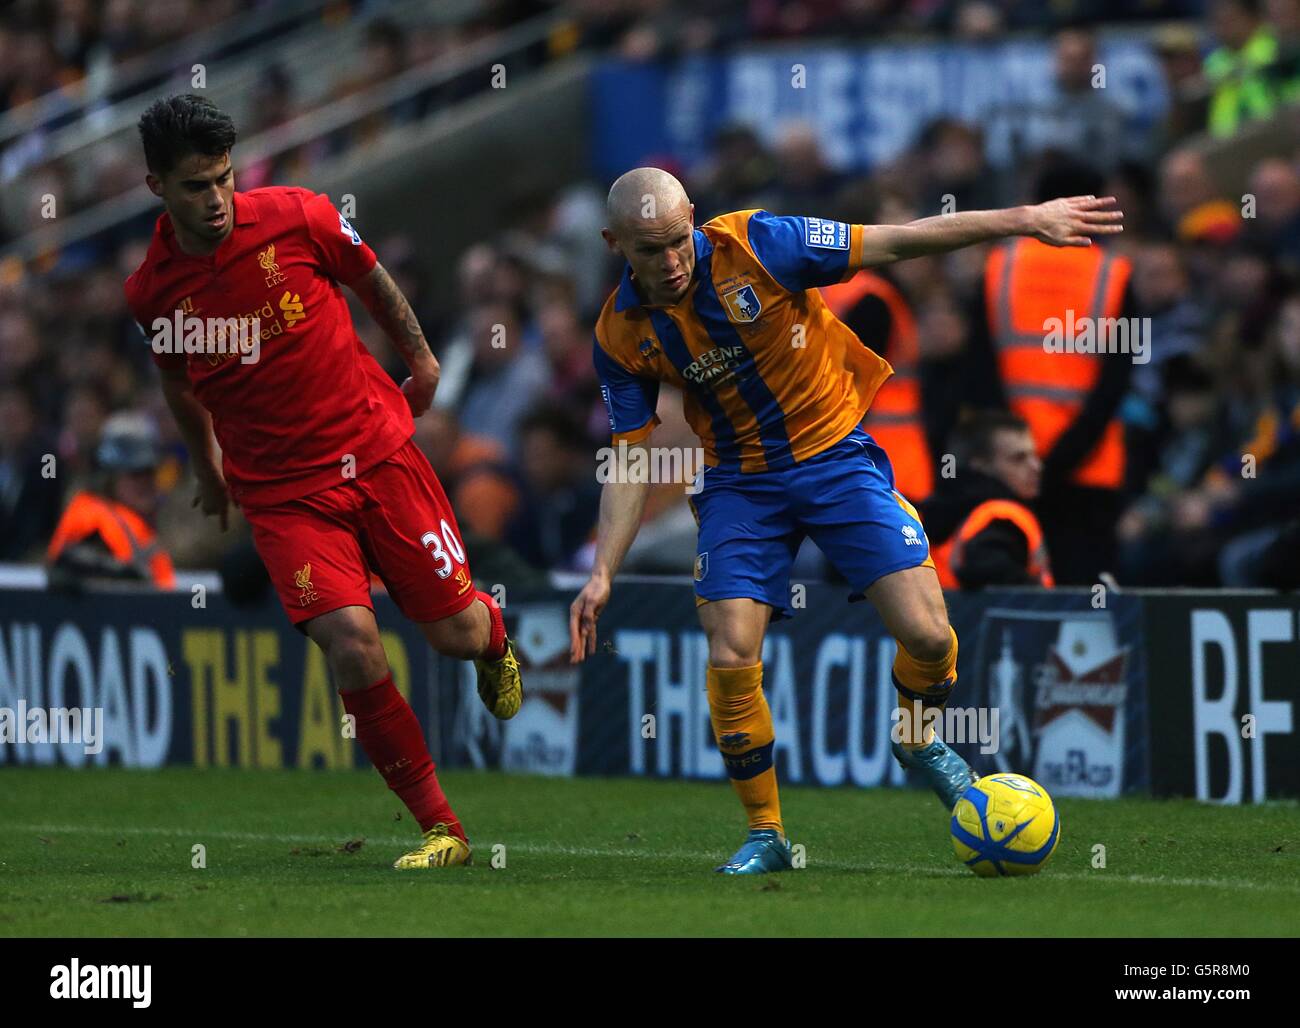 Liverpool's Jesus Fernandez Saez (Suso) (left) and Mansfield Town's Lindon Meikle battle for the ball Stock Photo